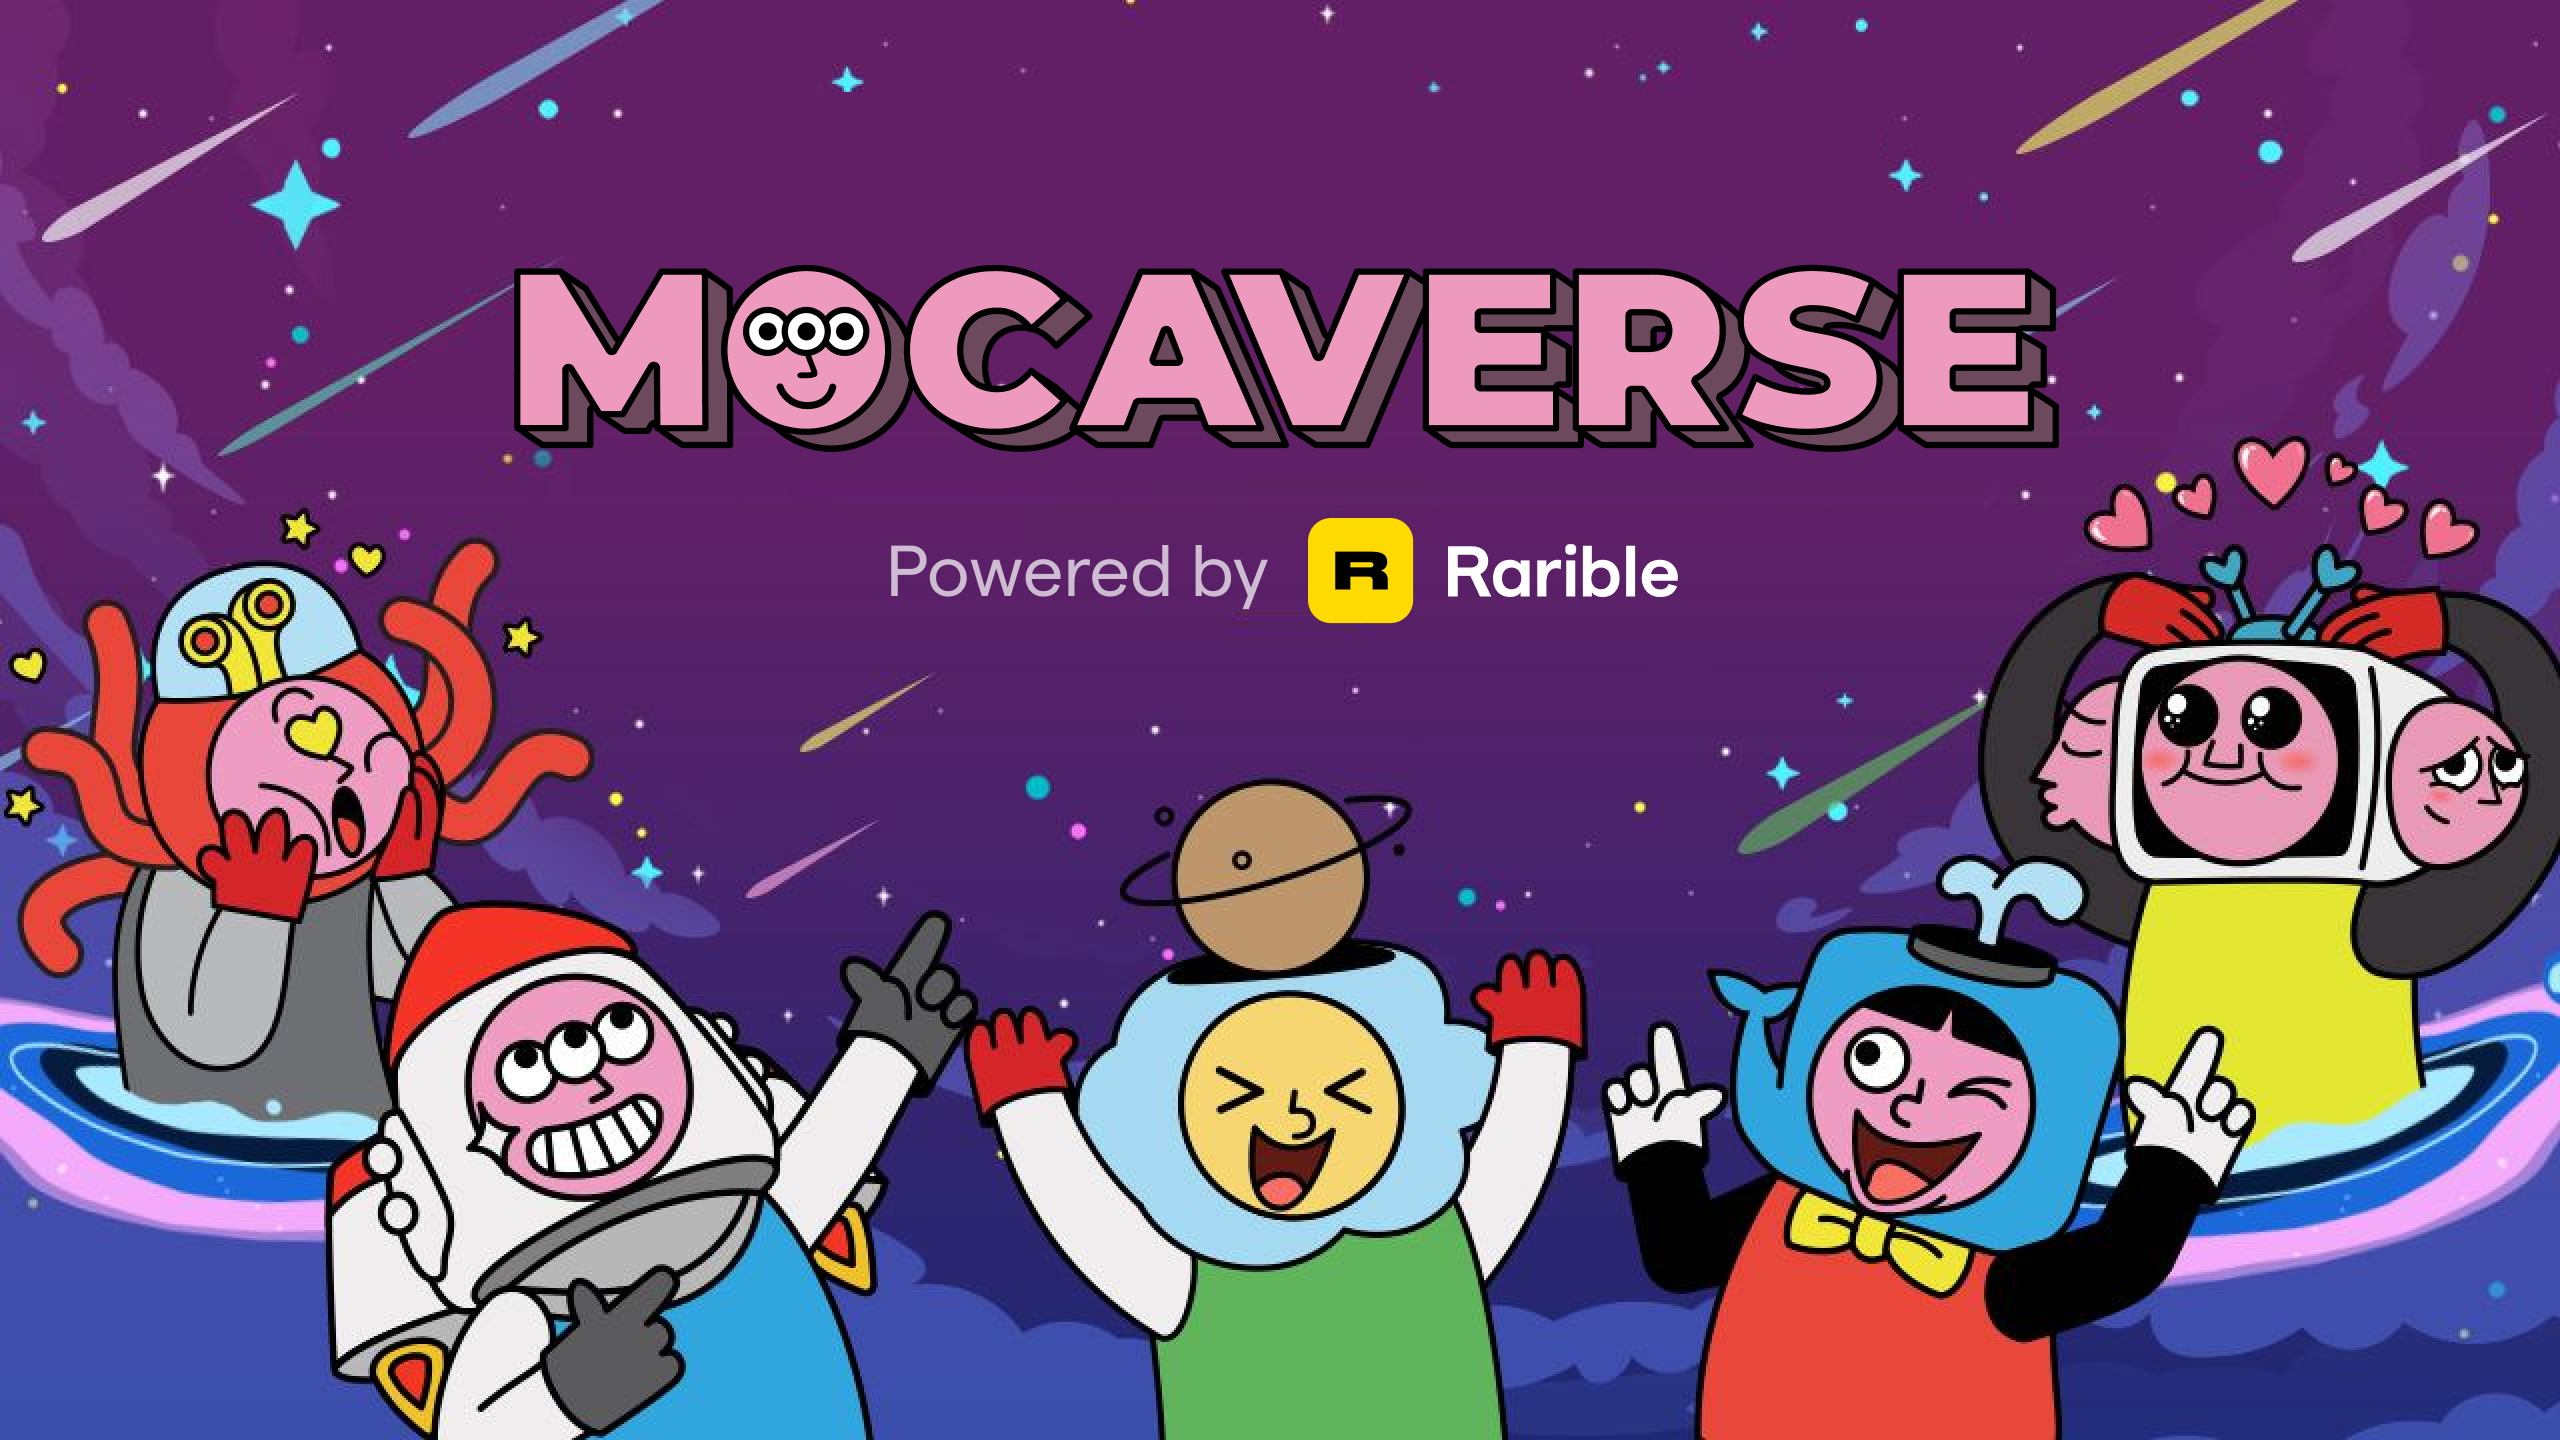 Mocaverse Marketplace Launches with Rarible, Offering Safe and Dedicated Trading for NFTs